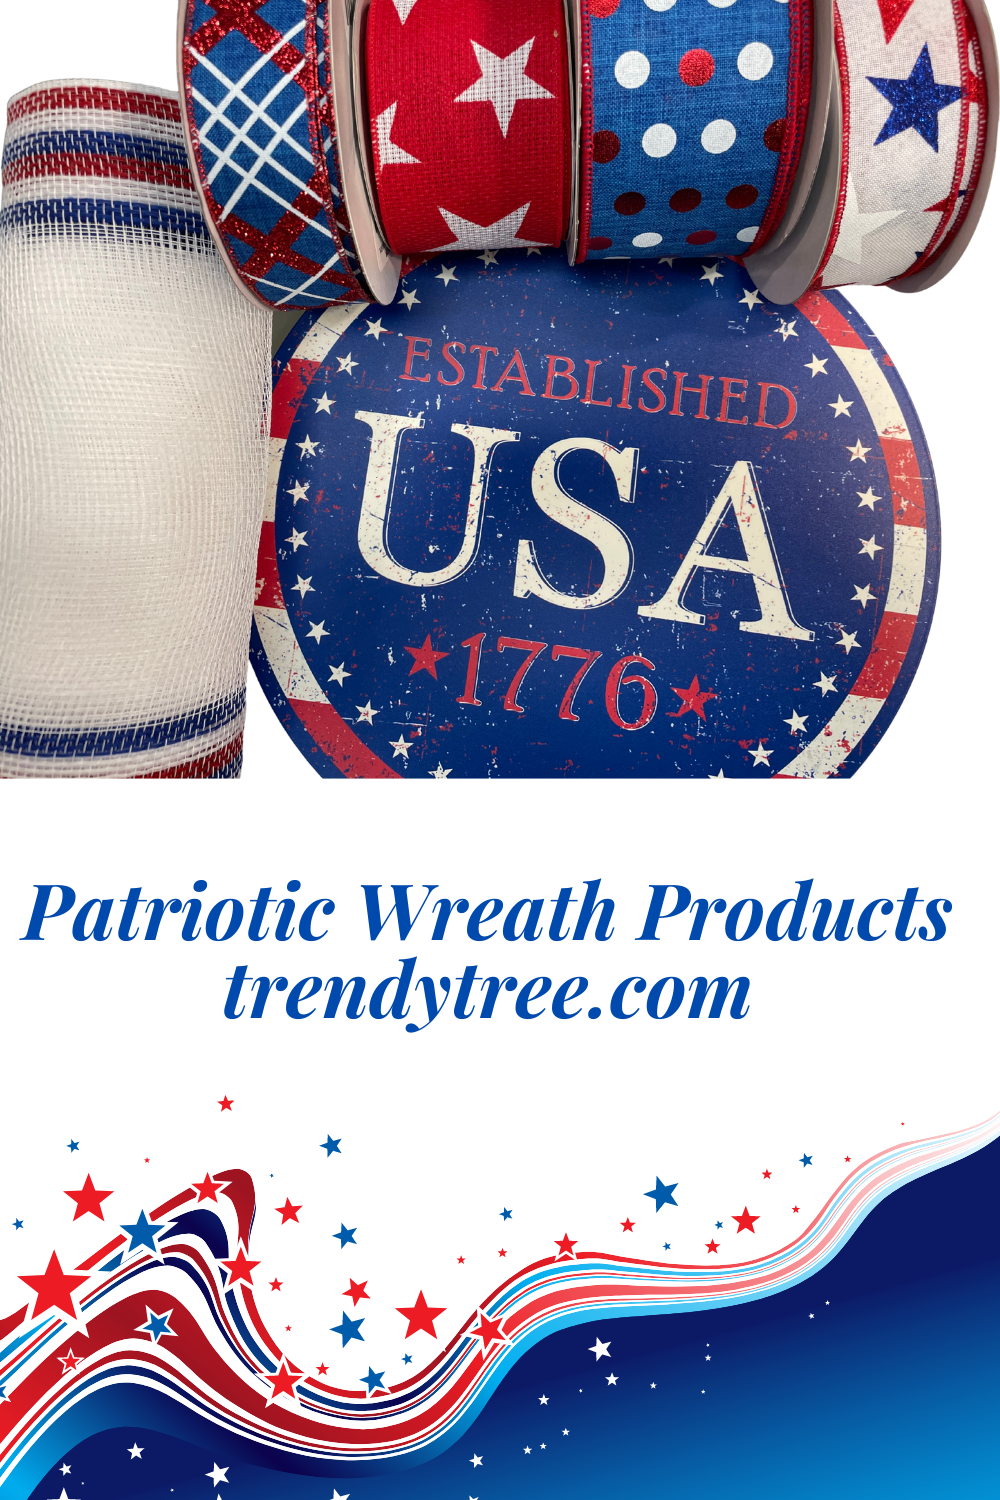 Patriotic Wreath Products from Trendy Tree